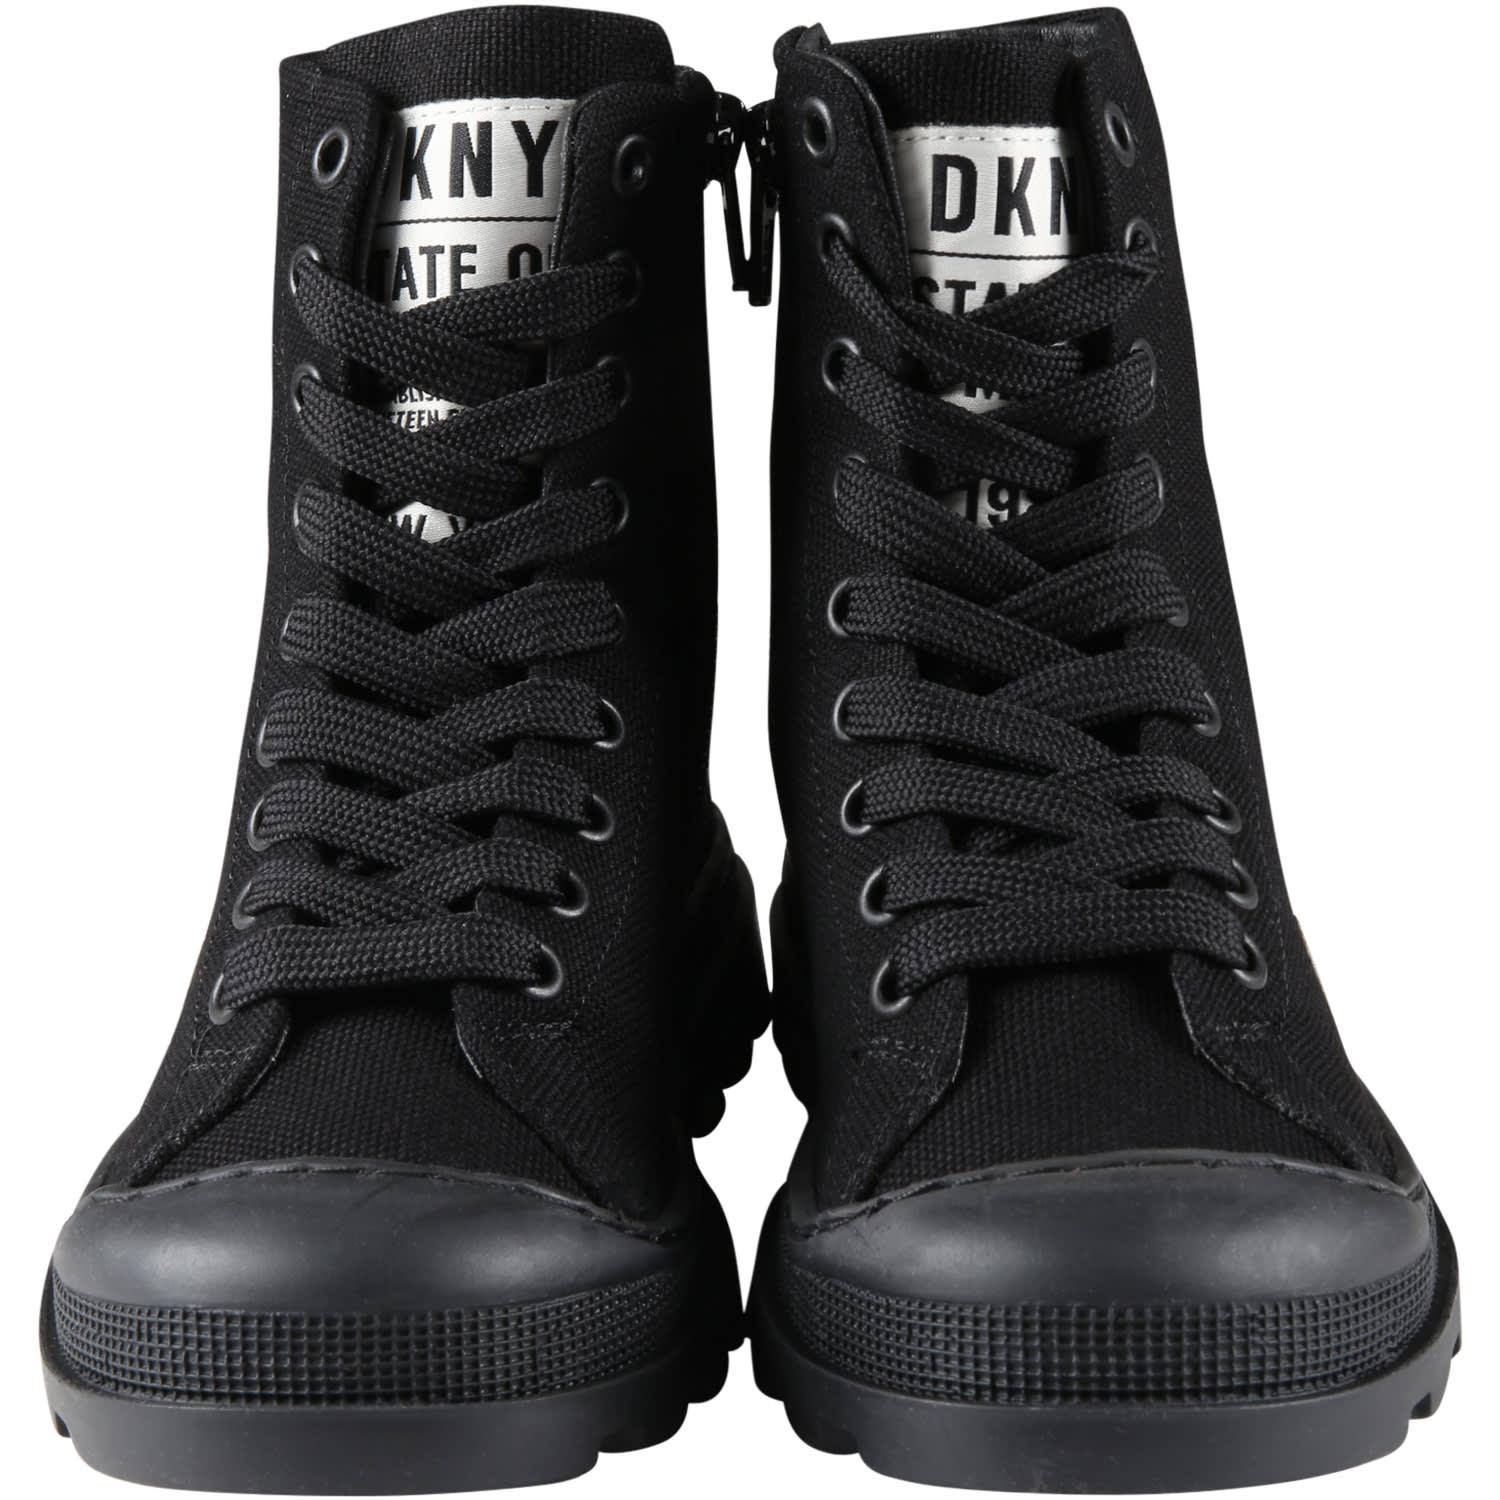 DKNY BLACK SNEAKERS FOR GIRL WITH WHITE LOGO 